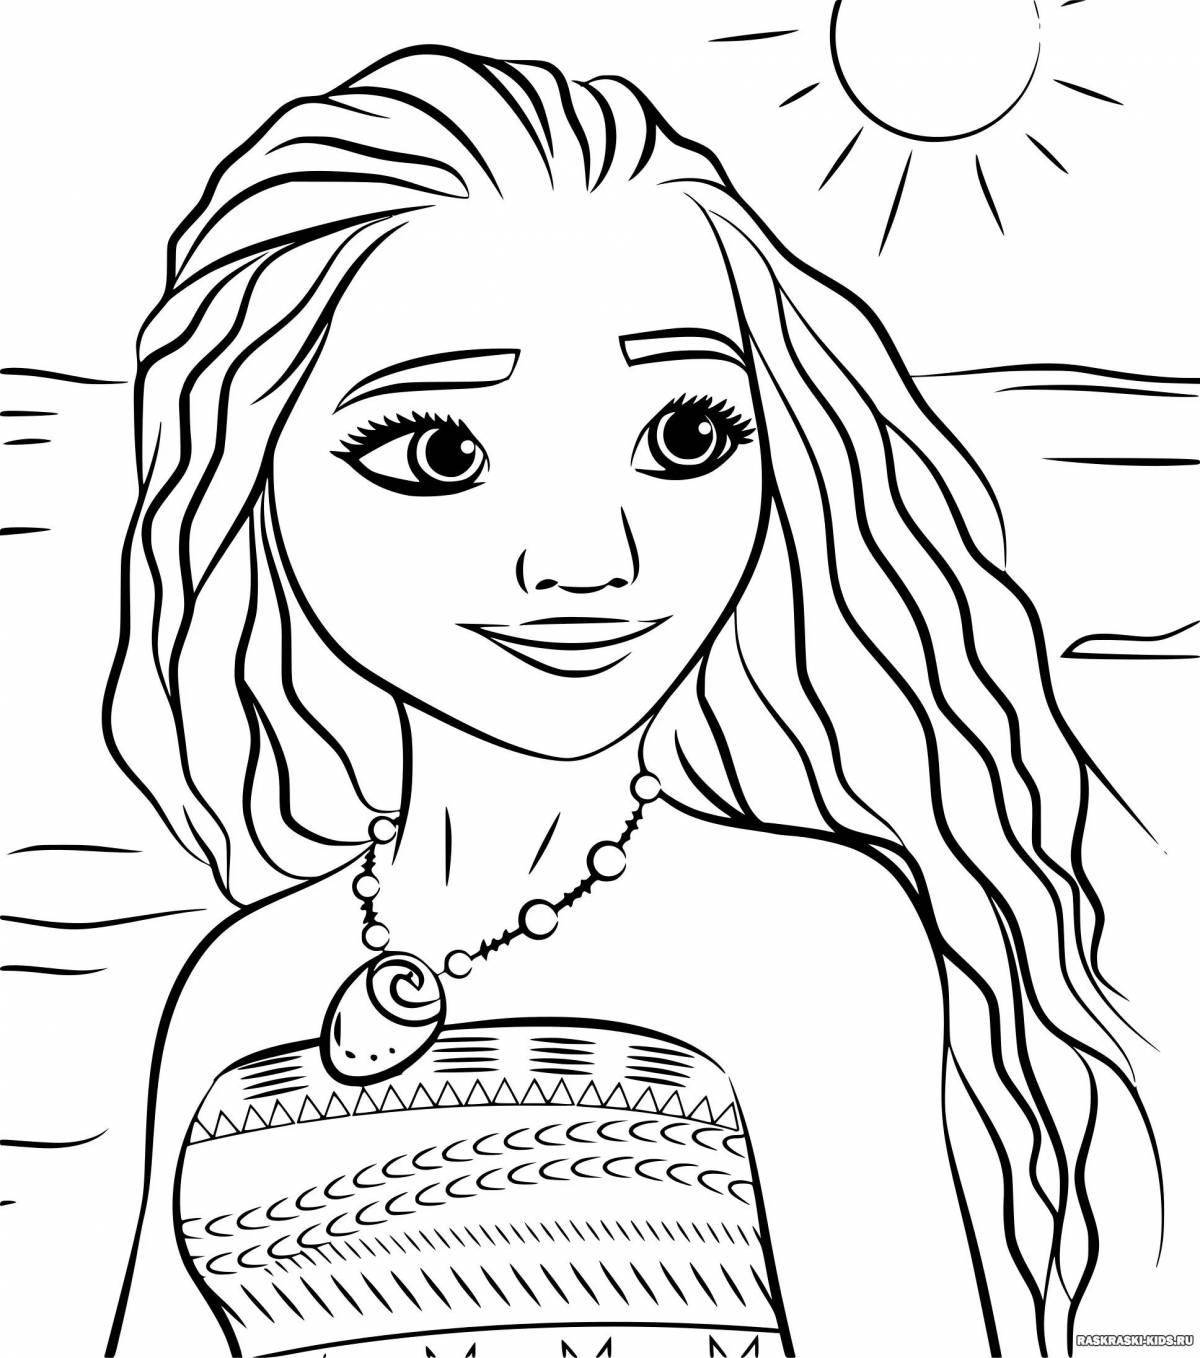 Colorful coloring pages for 12 year olds